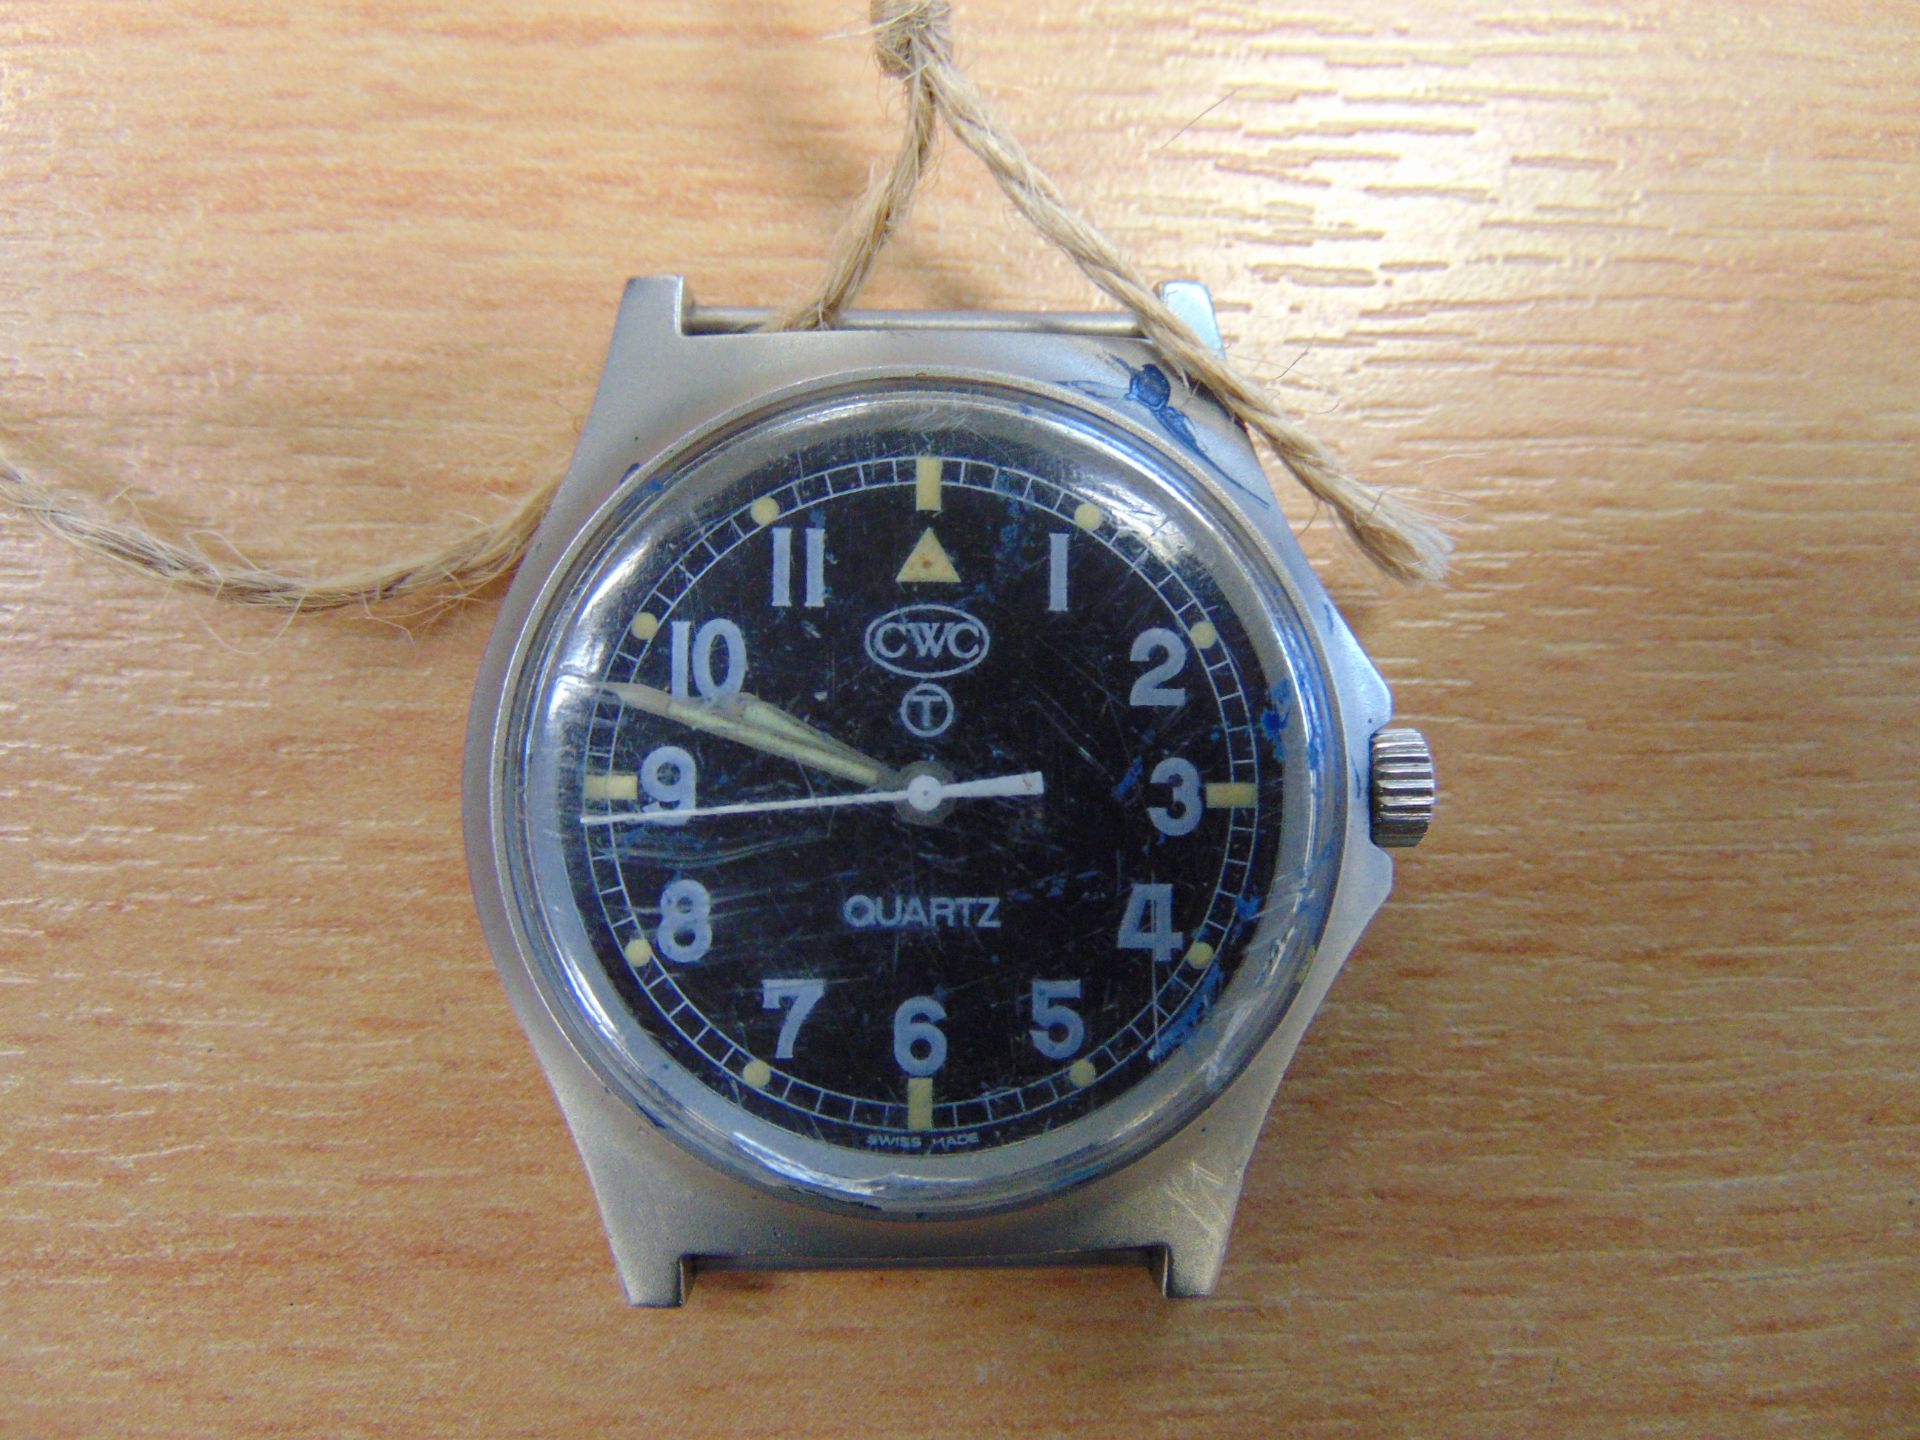 CWC (Cabot Watch Co Switzerland) 0555 Royal Marines / Navy Issue Service Watch Nato Marks - Image 2 of 4